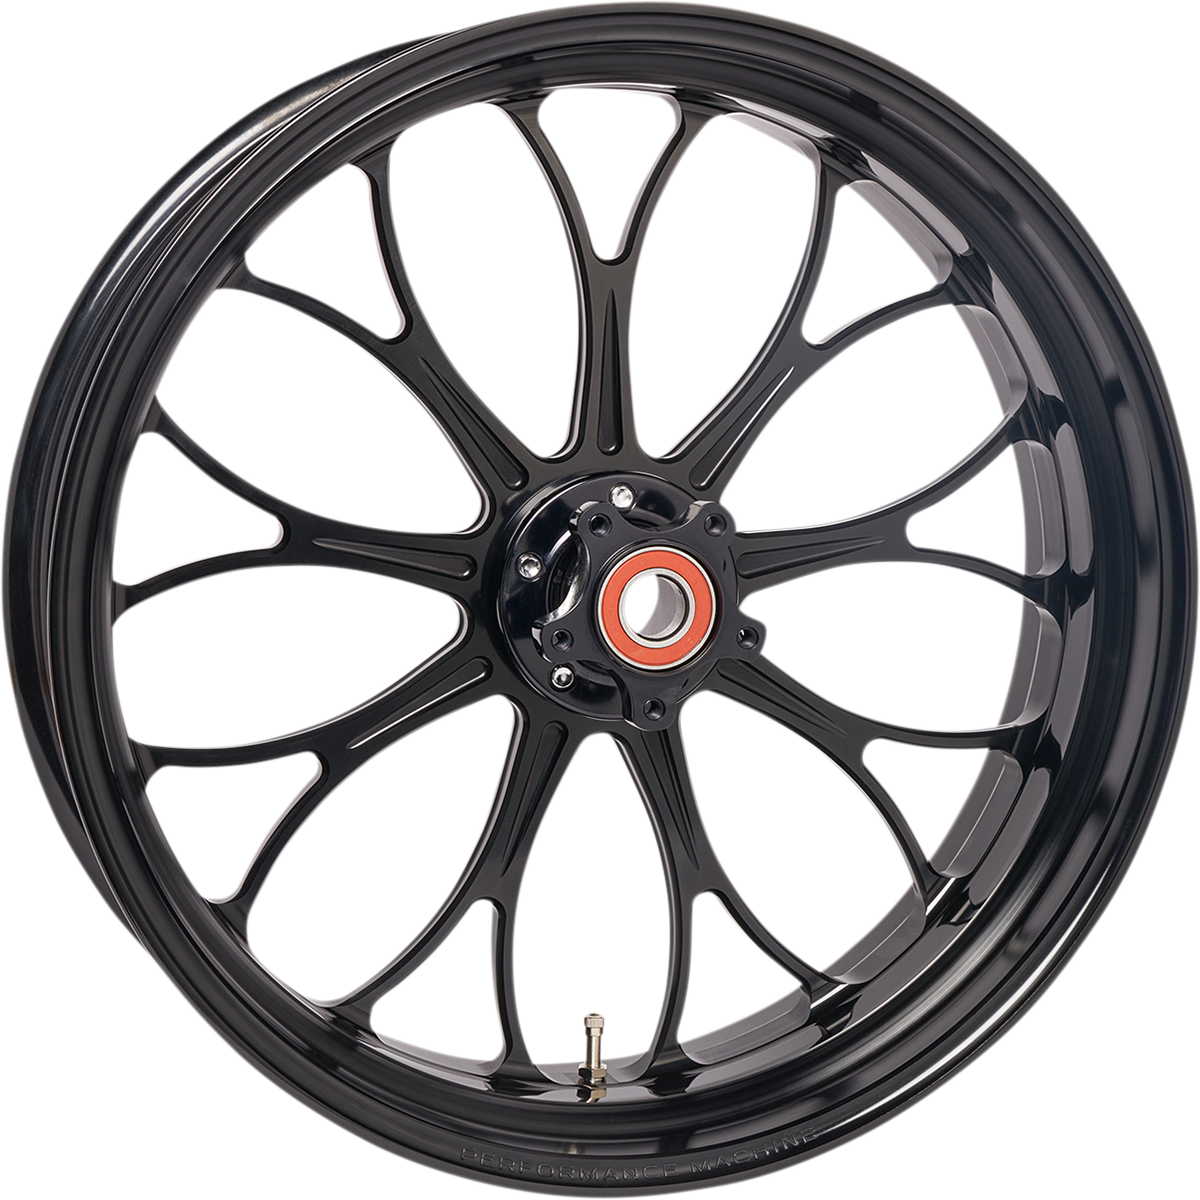 Wheel - Revolution - Dual Disc - Front - Black Ops™ - 21"x3.50" - No ABS